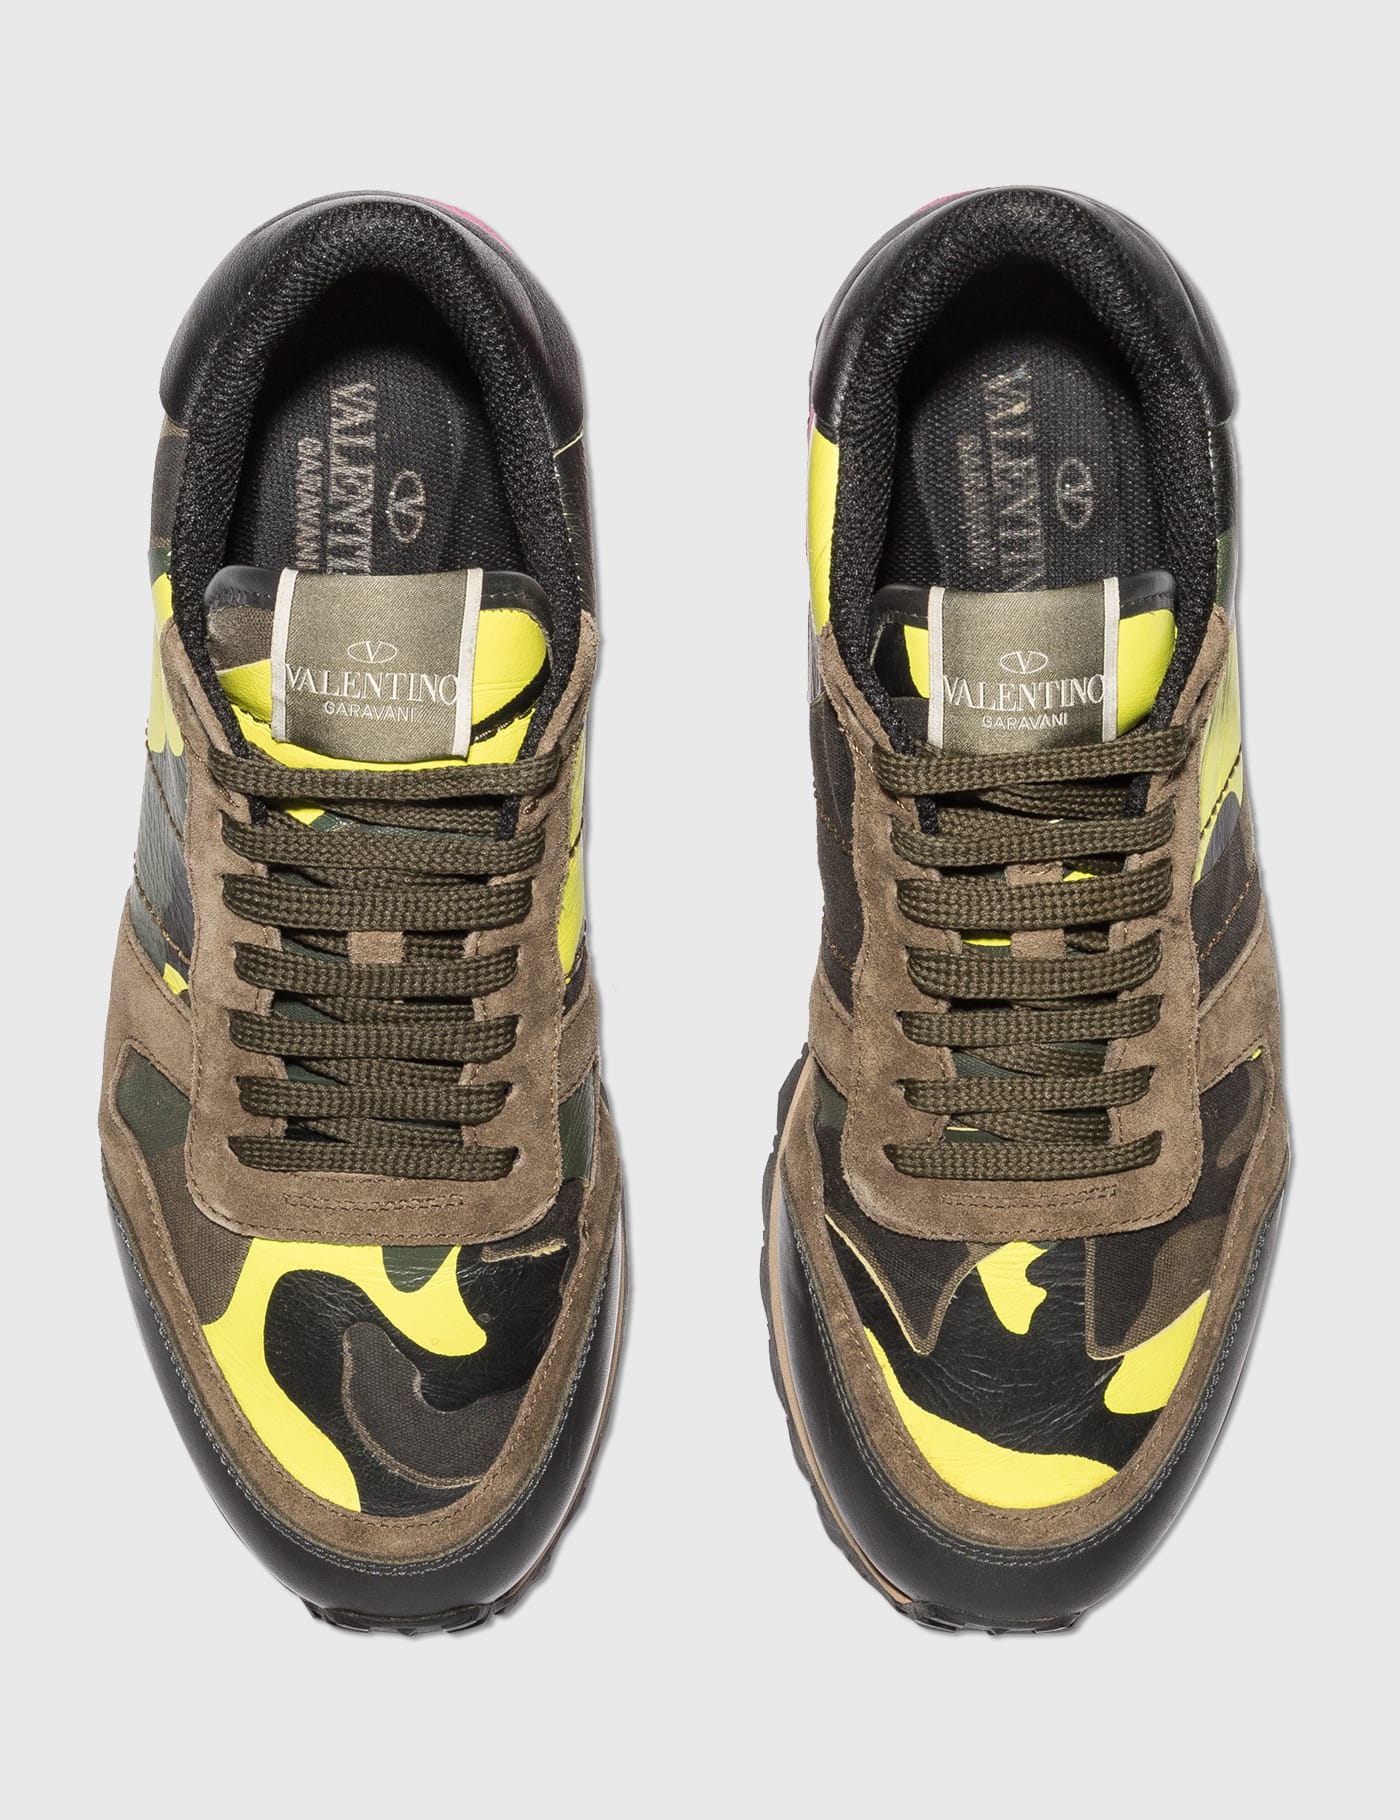 These Camo Valentino Sneakers Will Never Blend In | GQ